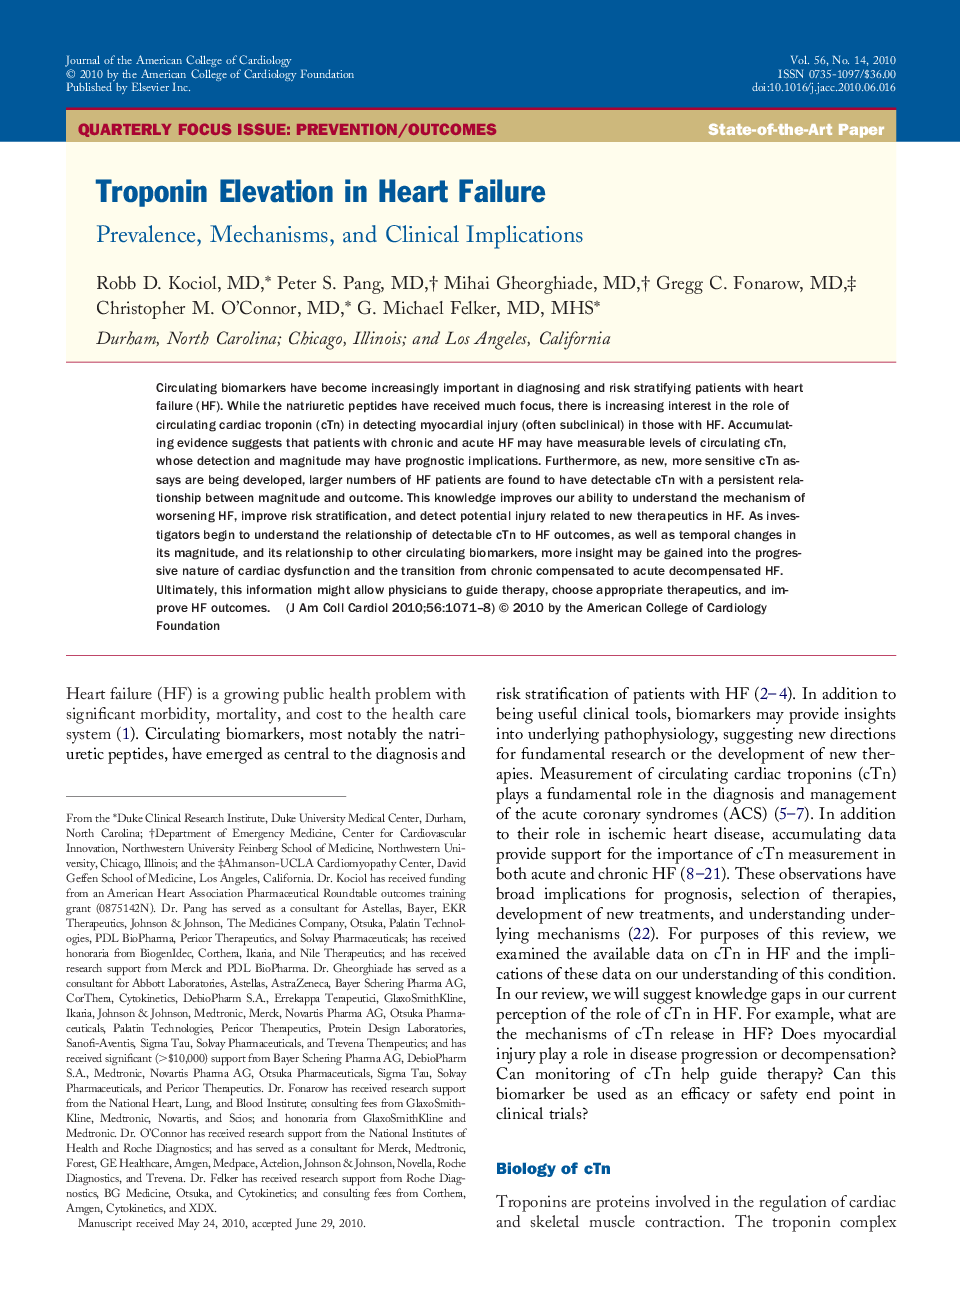 Troponin Elevation in Heart Failure : Prevalence, Mechanisms, and Clinical Implications